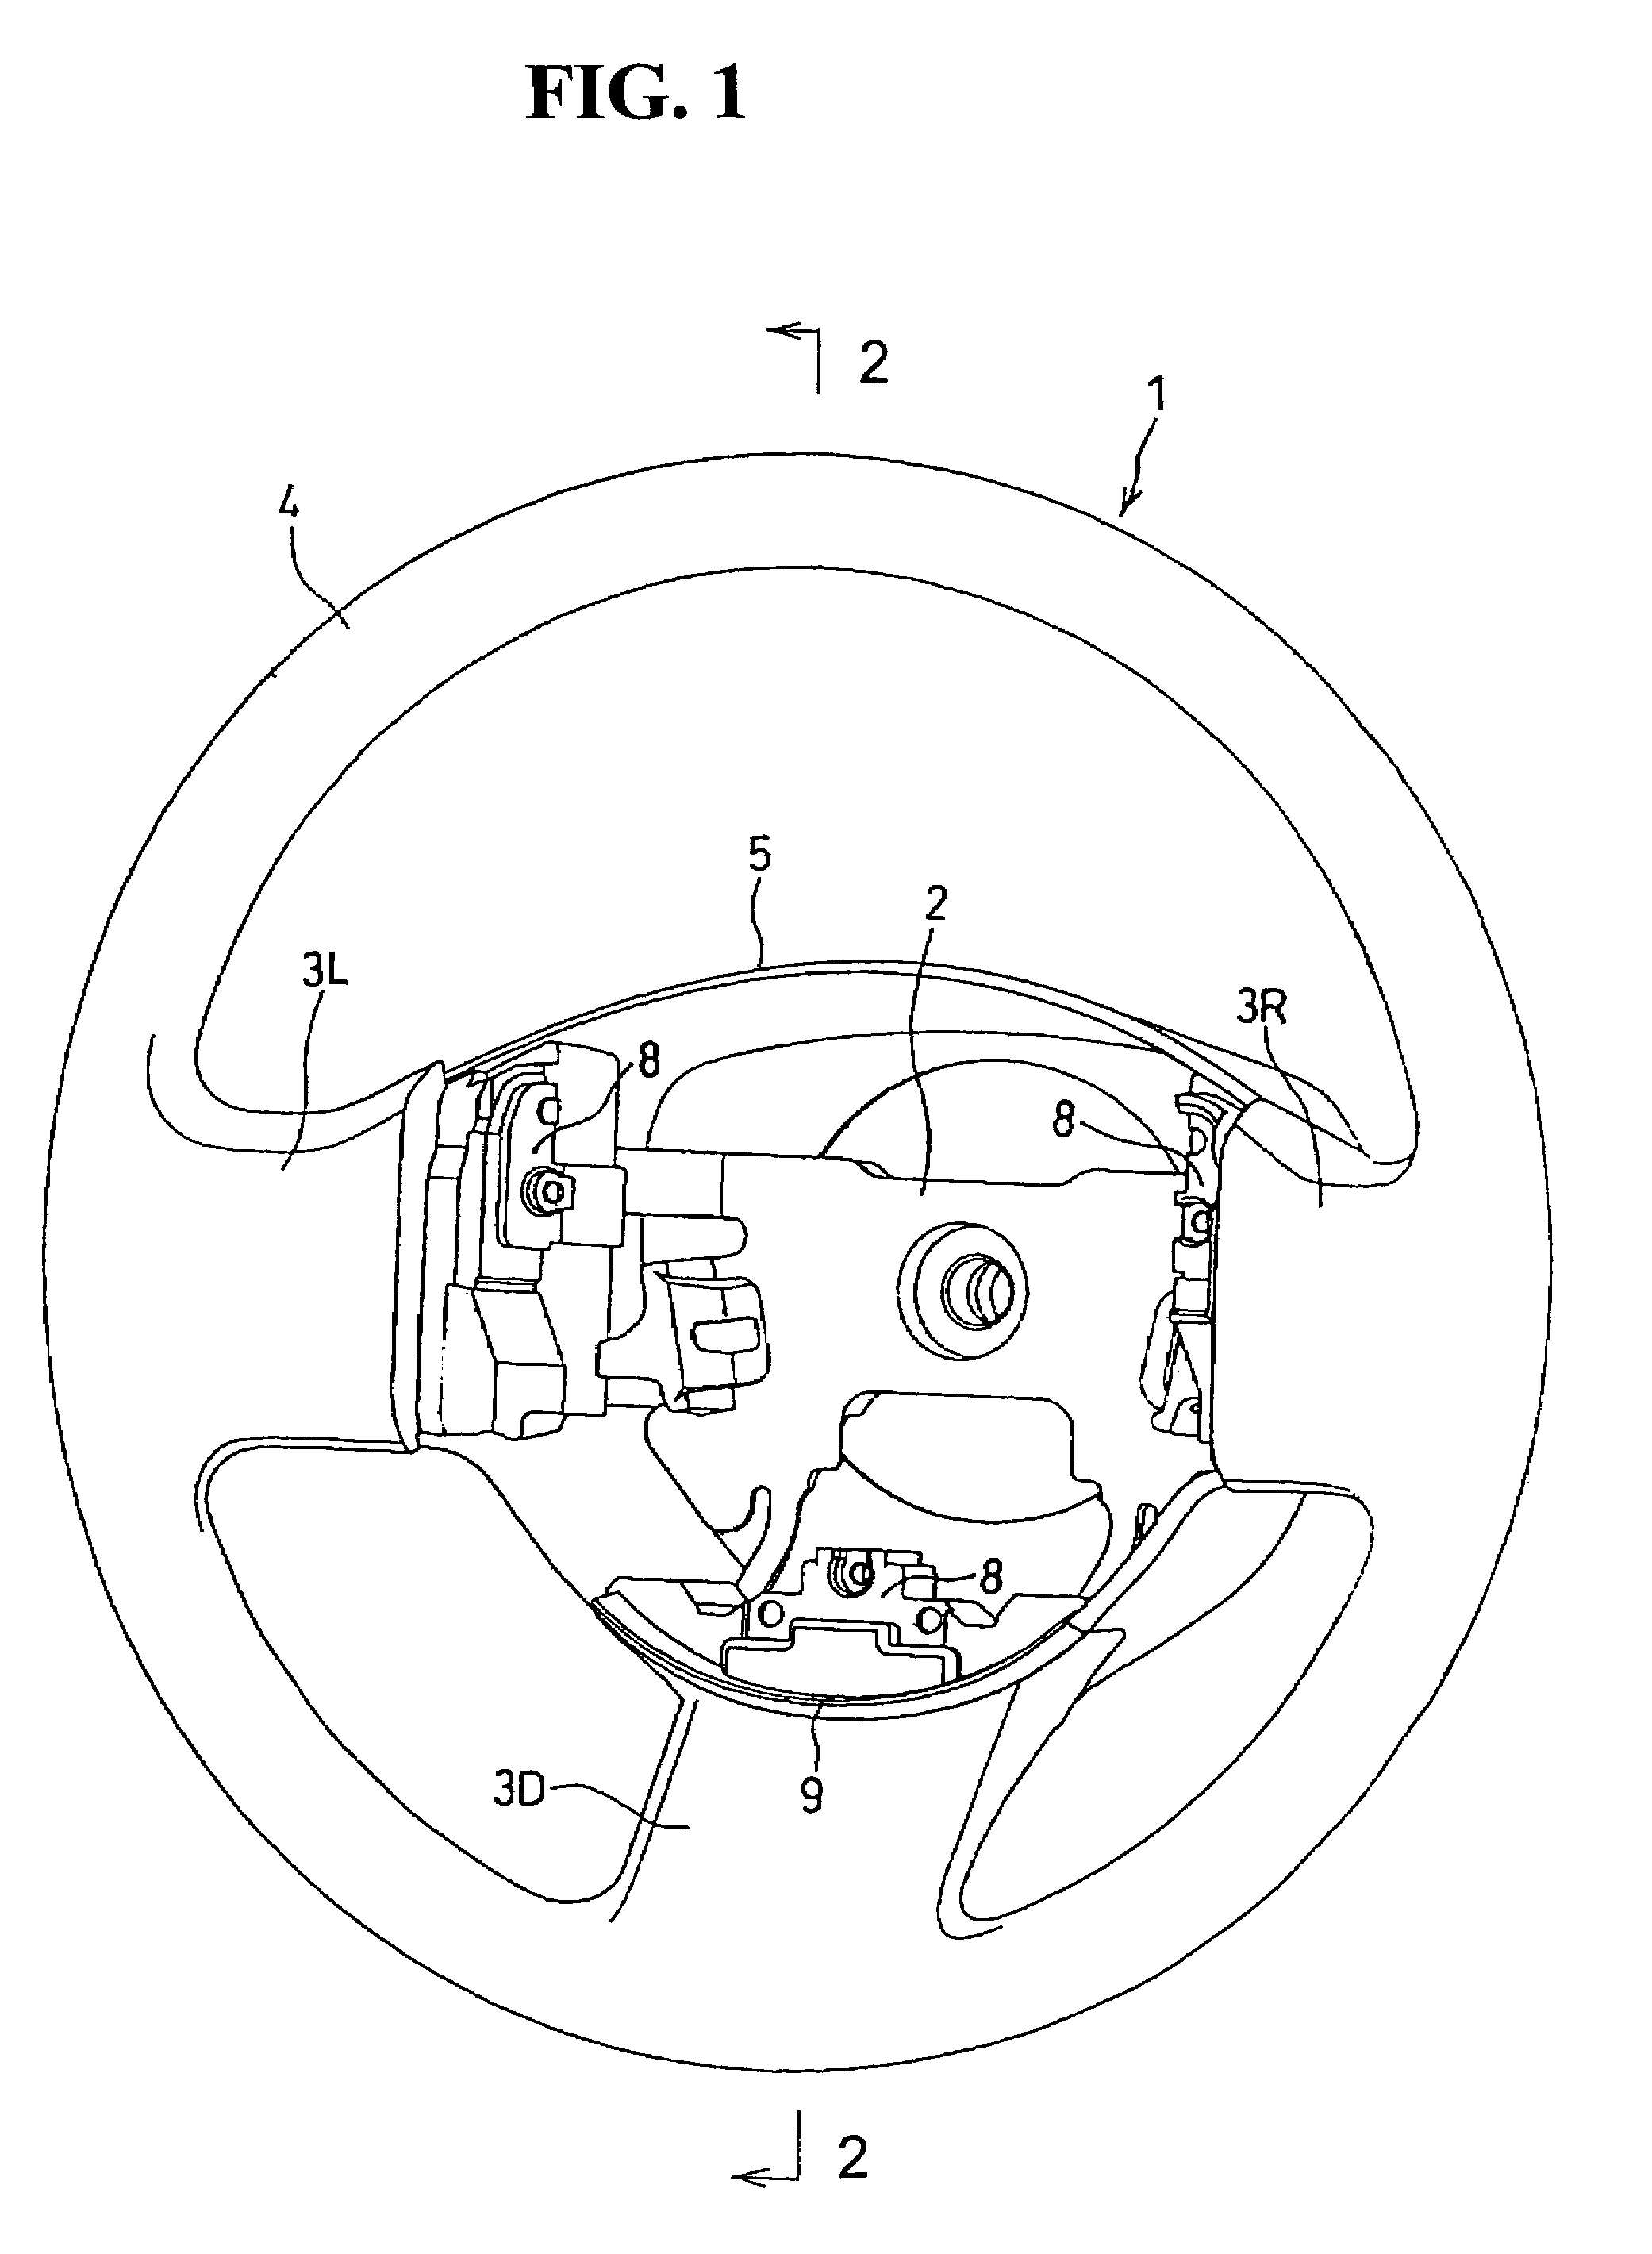 Steering wheel with airbag apparatus